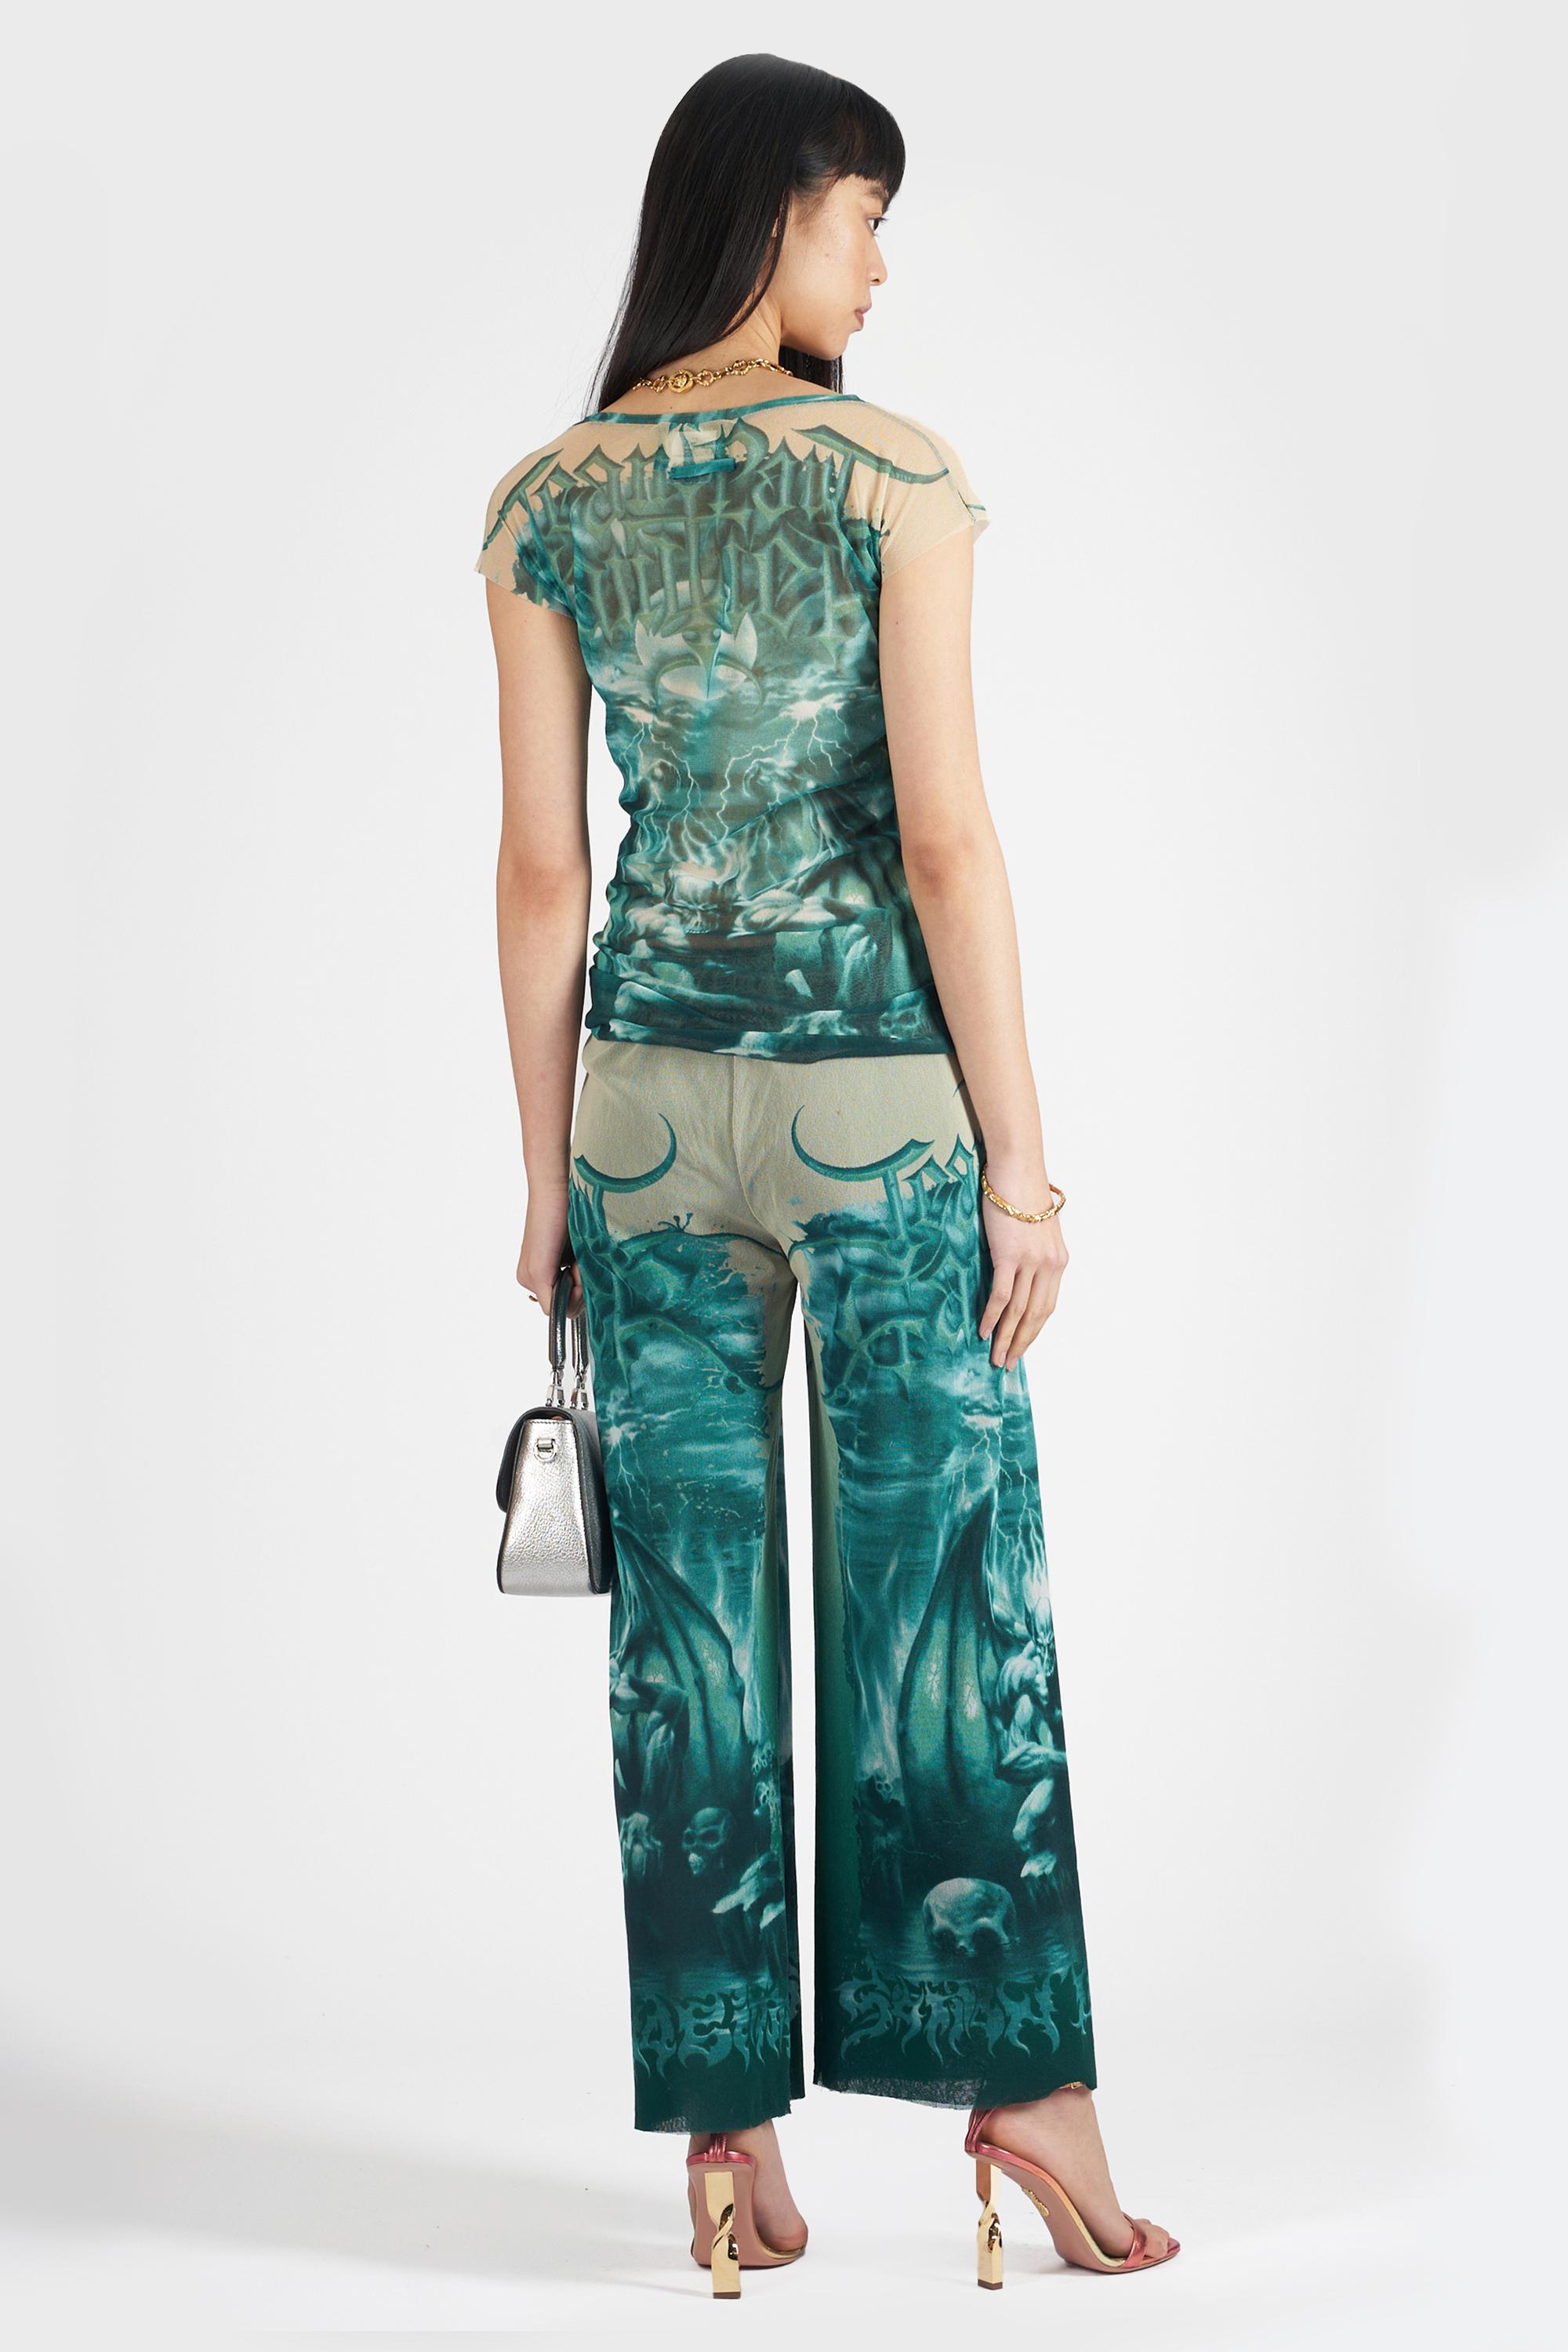 We are excited to present this Jean Paul Gaultier Spring Summer 2001 gargoyles print mesh co-ord set. Features short sleeved top and low waisted trousers. In excellent vintage condition. Authenticity guaranteed.

Label size: Top: L, Trousers: